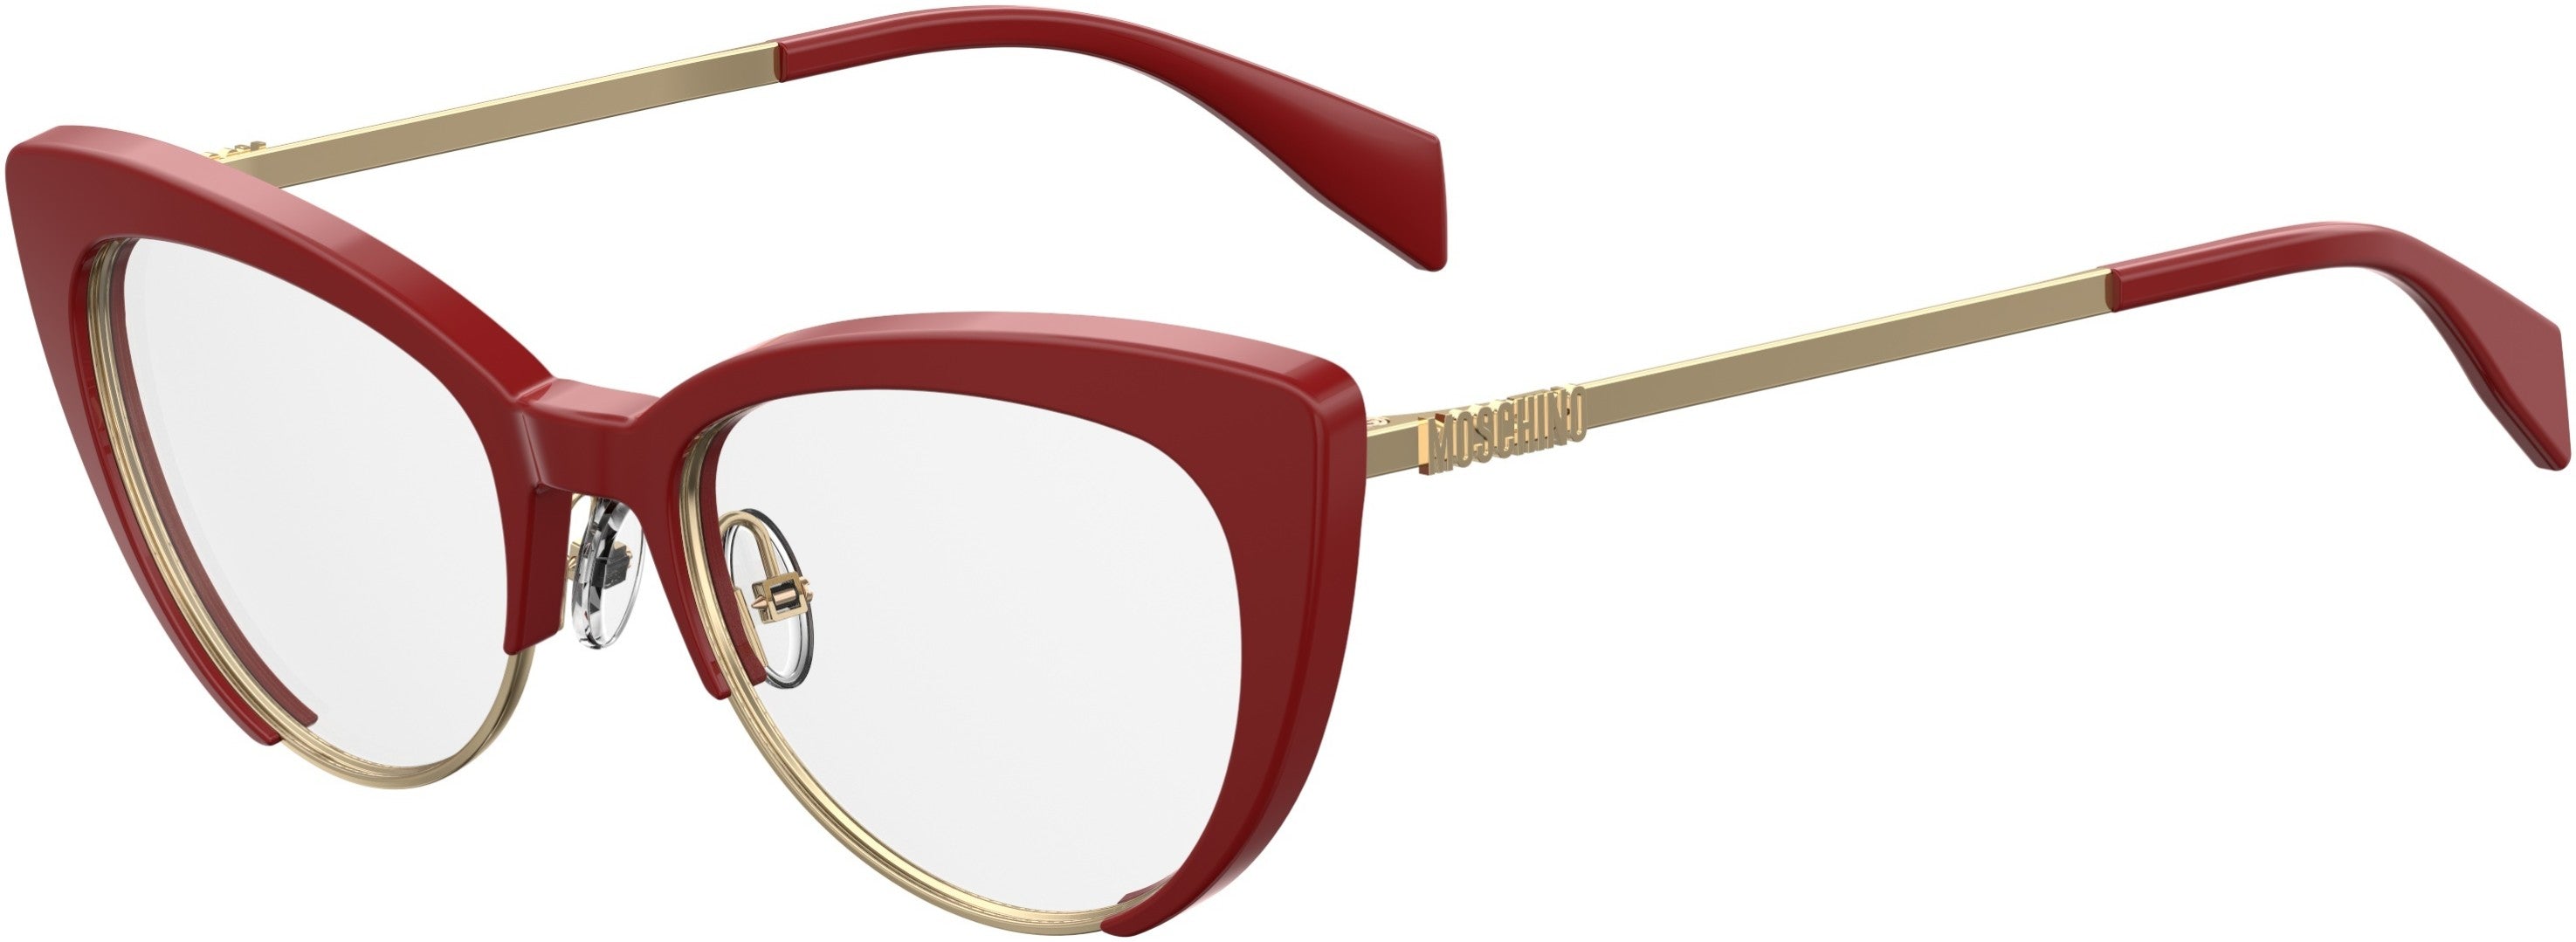  Moschino 521 Cat Eye/butterfly Eyeglasses 0C9A-0C9A  Red (00 Demo Lens)